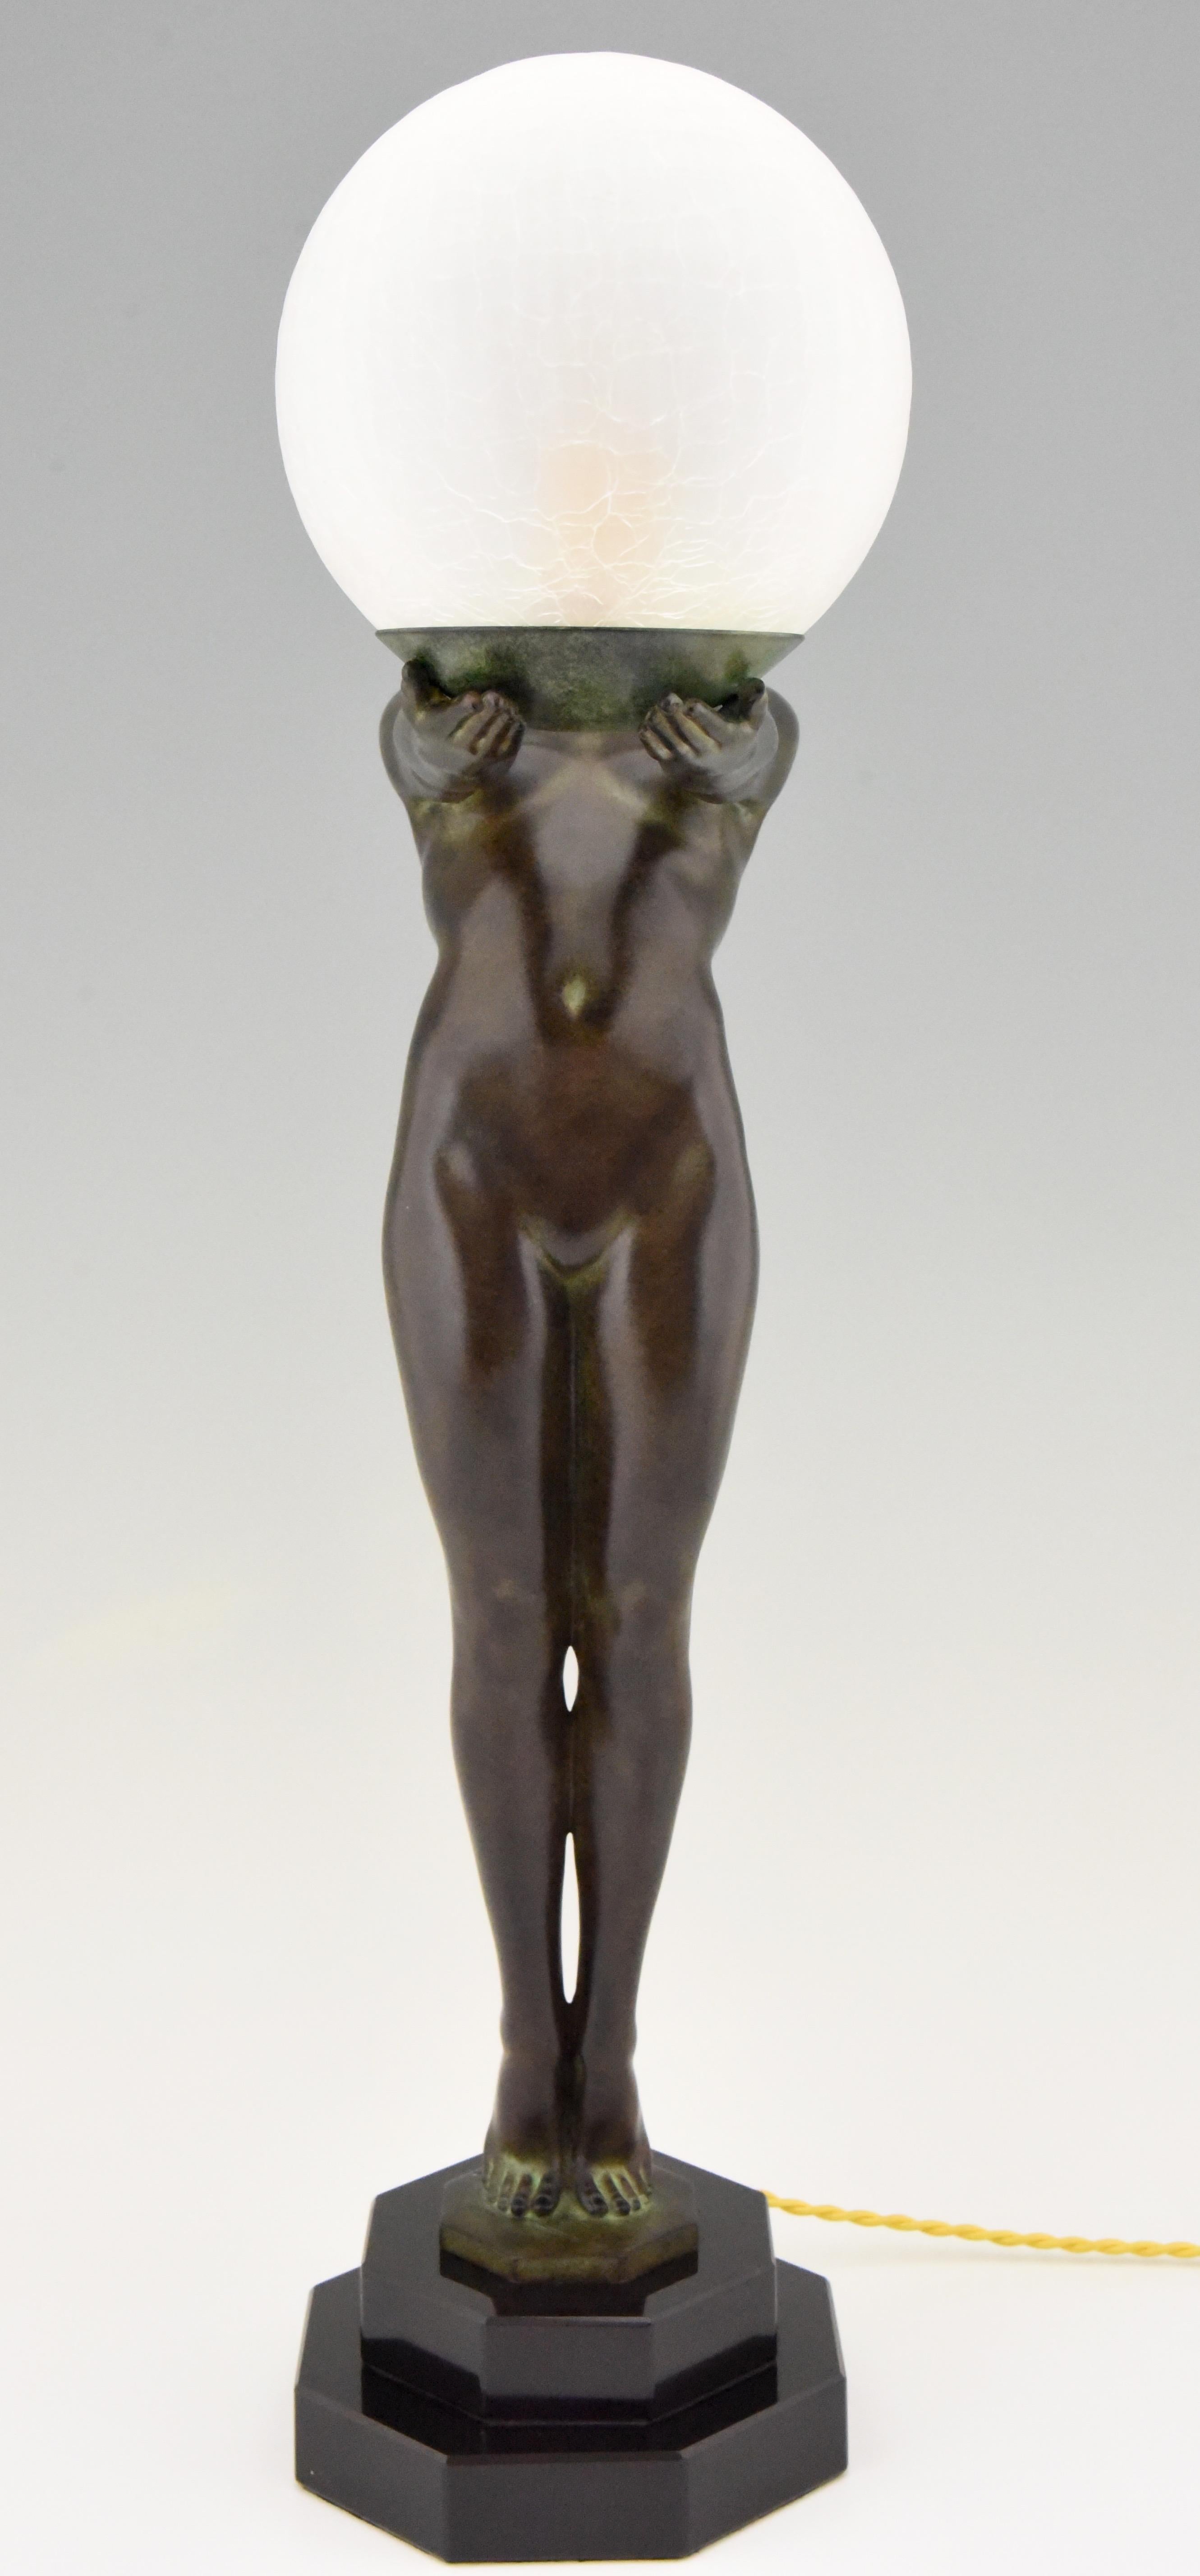 Contemporary Pair of Art Deco Style Lamps Lumina Standing Nude Sculpture Max Le Verrier For Sale